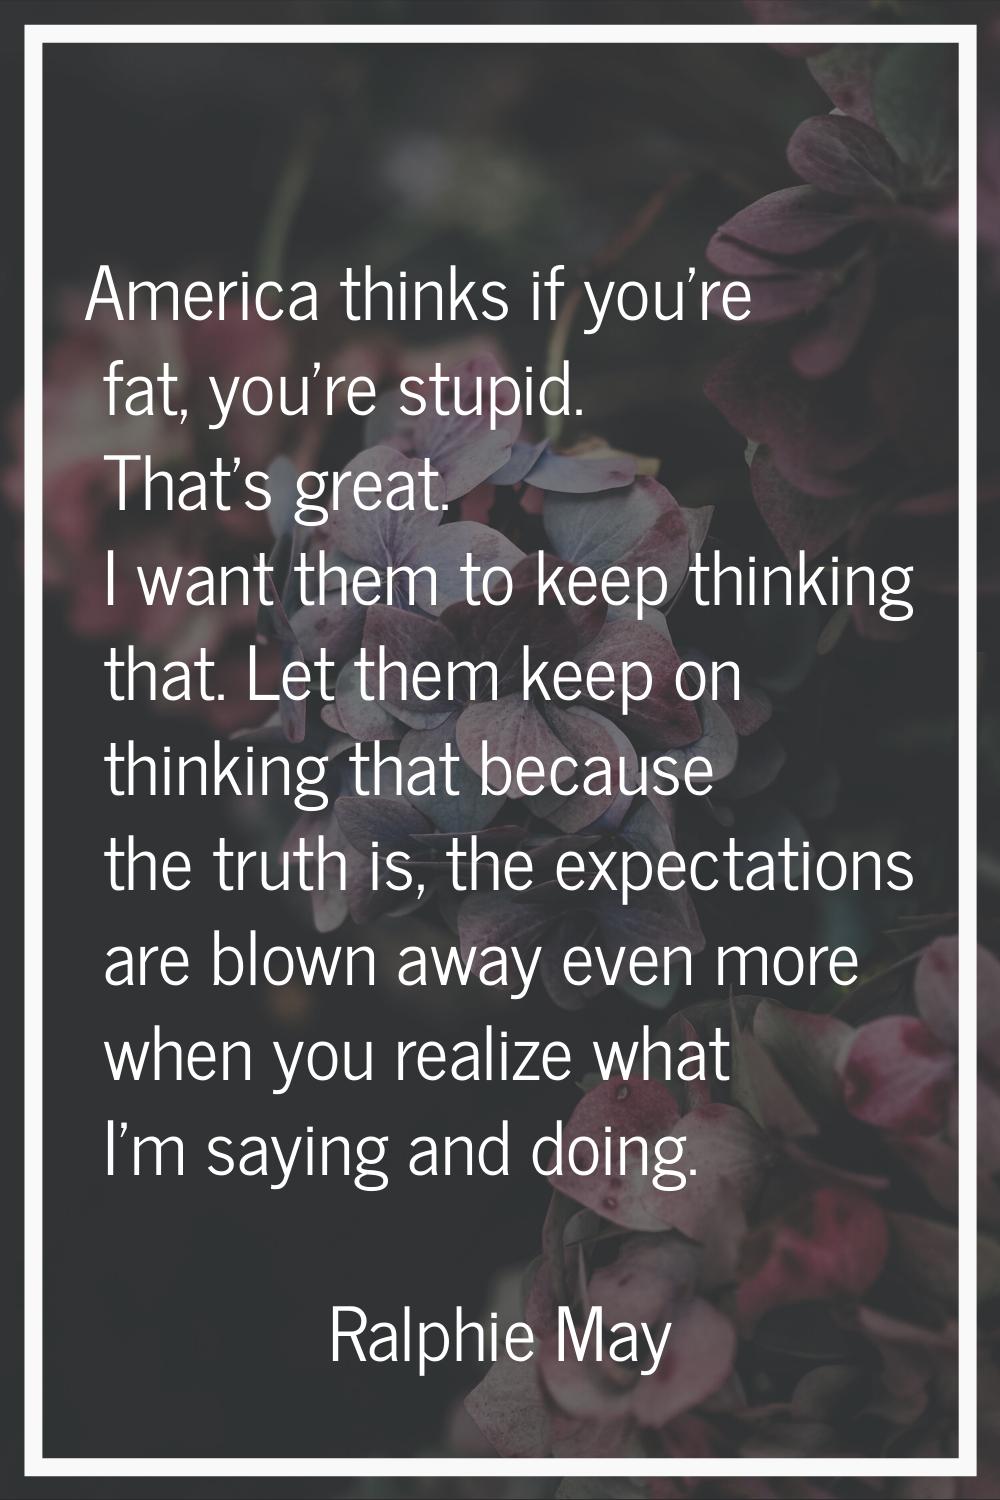 America thinks if you're fat, you're stupid. That's great. I want them to keep thinking that. Let t